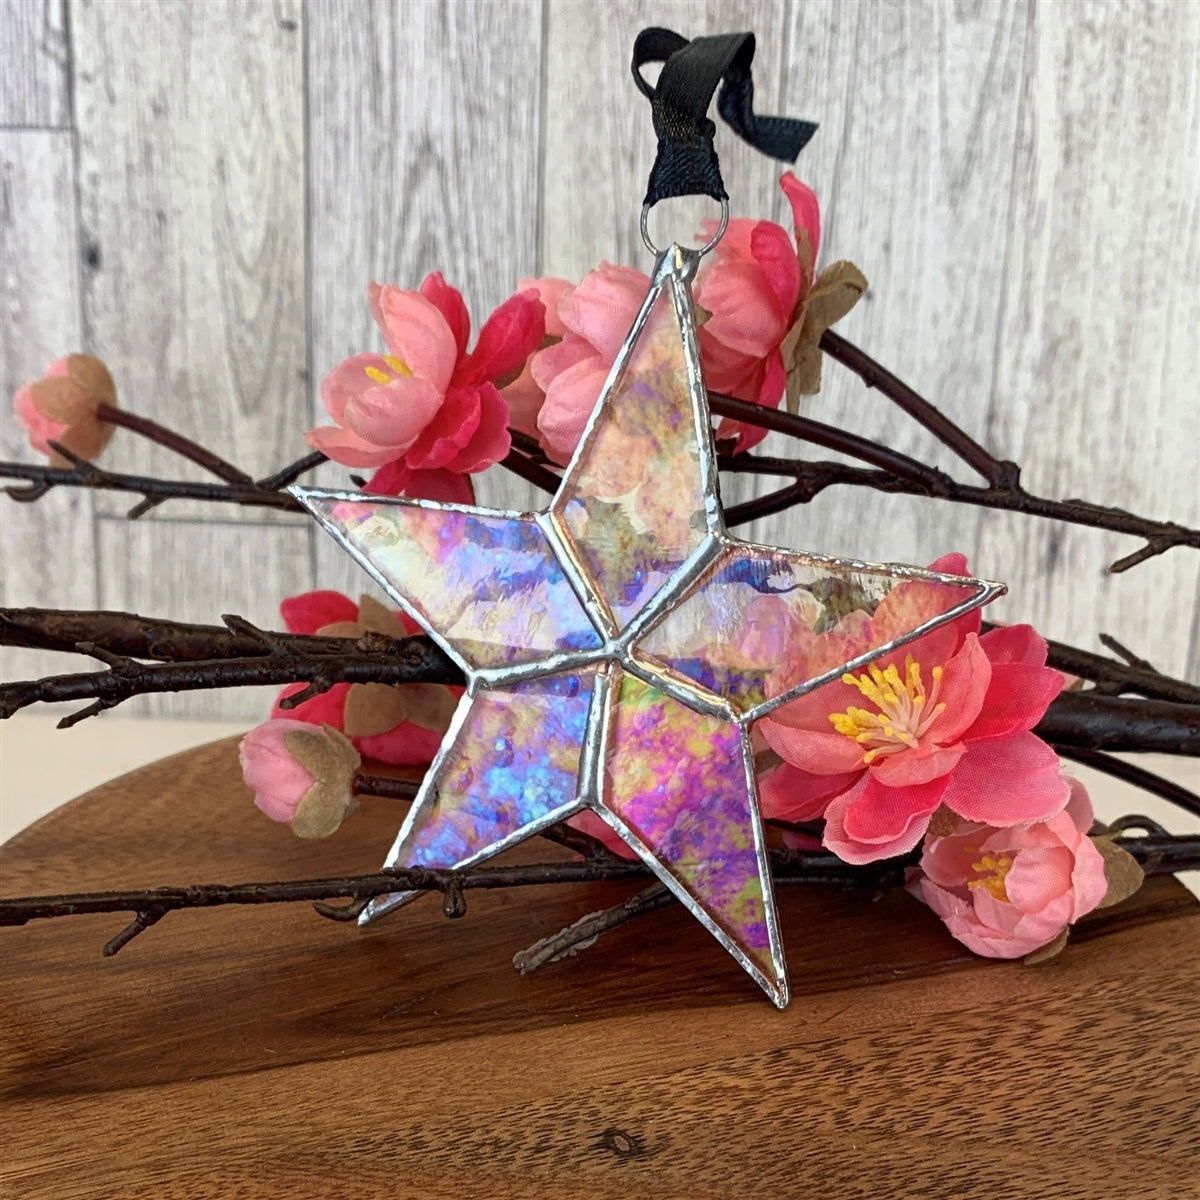 Clear iridescent stained glass star with silver edging with black satin ribbon.